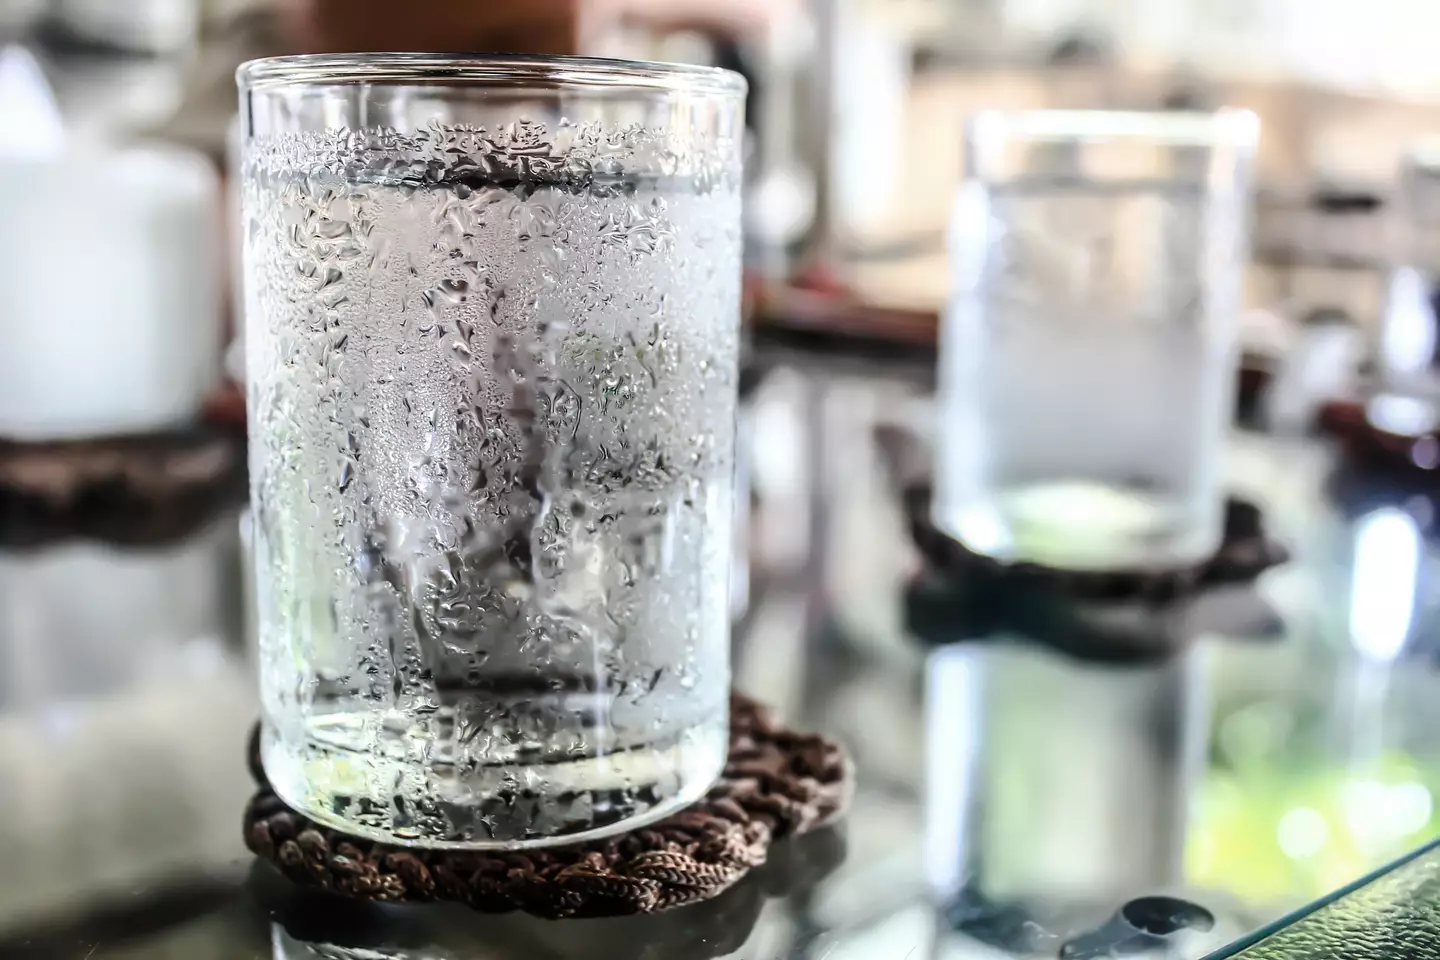 You might want to rethink that glass of cold water (